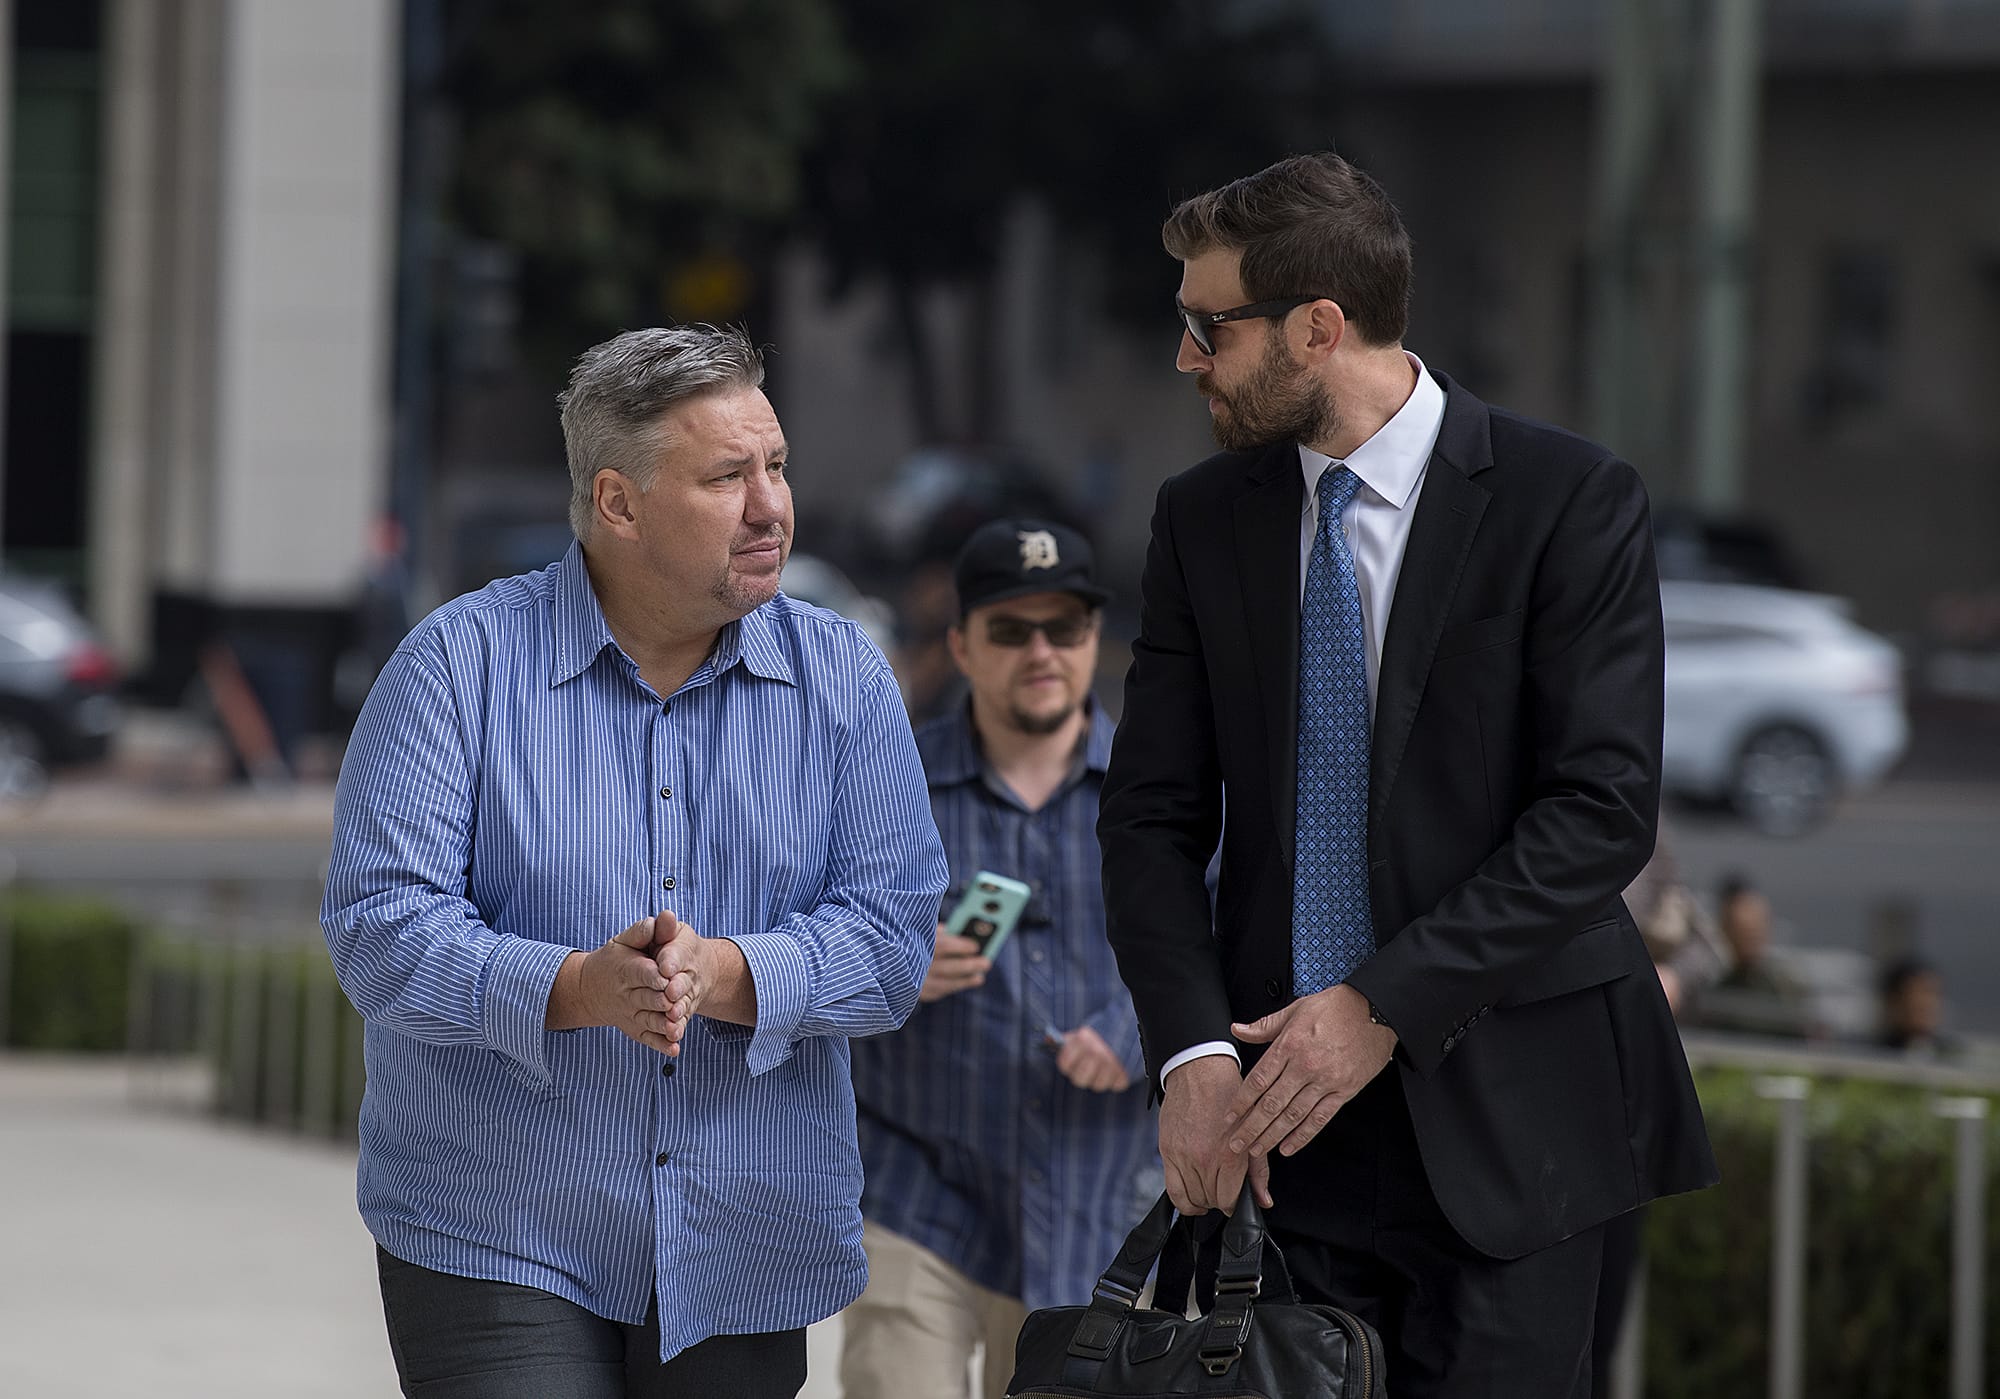 Former Vancouver pastor John Bishop, left, arrives to be sentenced for unlawful importation of a controlled substance-marijuana at the James M. Carter and Judith N. Keep United States Courthouse in San Diego, Calif., on Friday morning, Sept. 21, 2018.